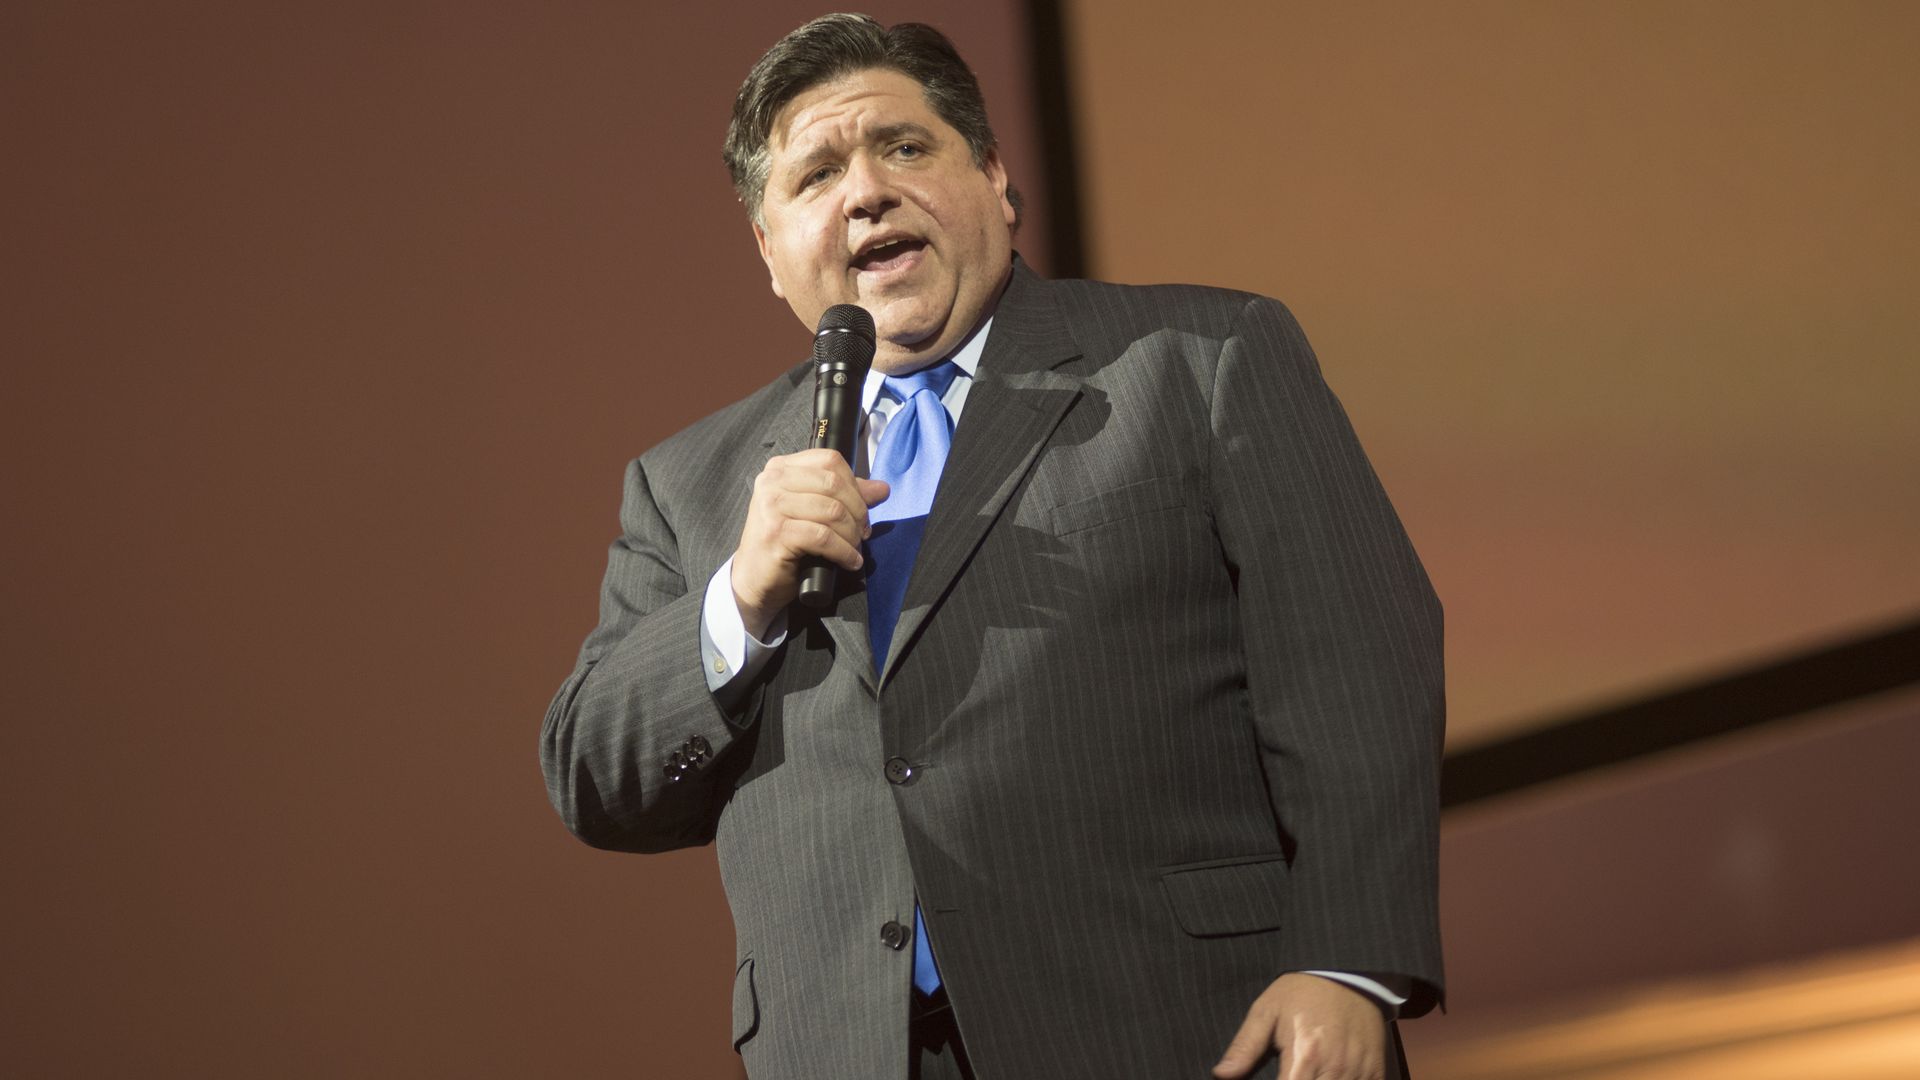 JB Pritzker, governor of the state of Illinois